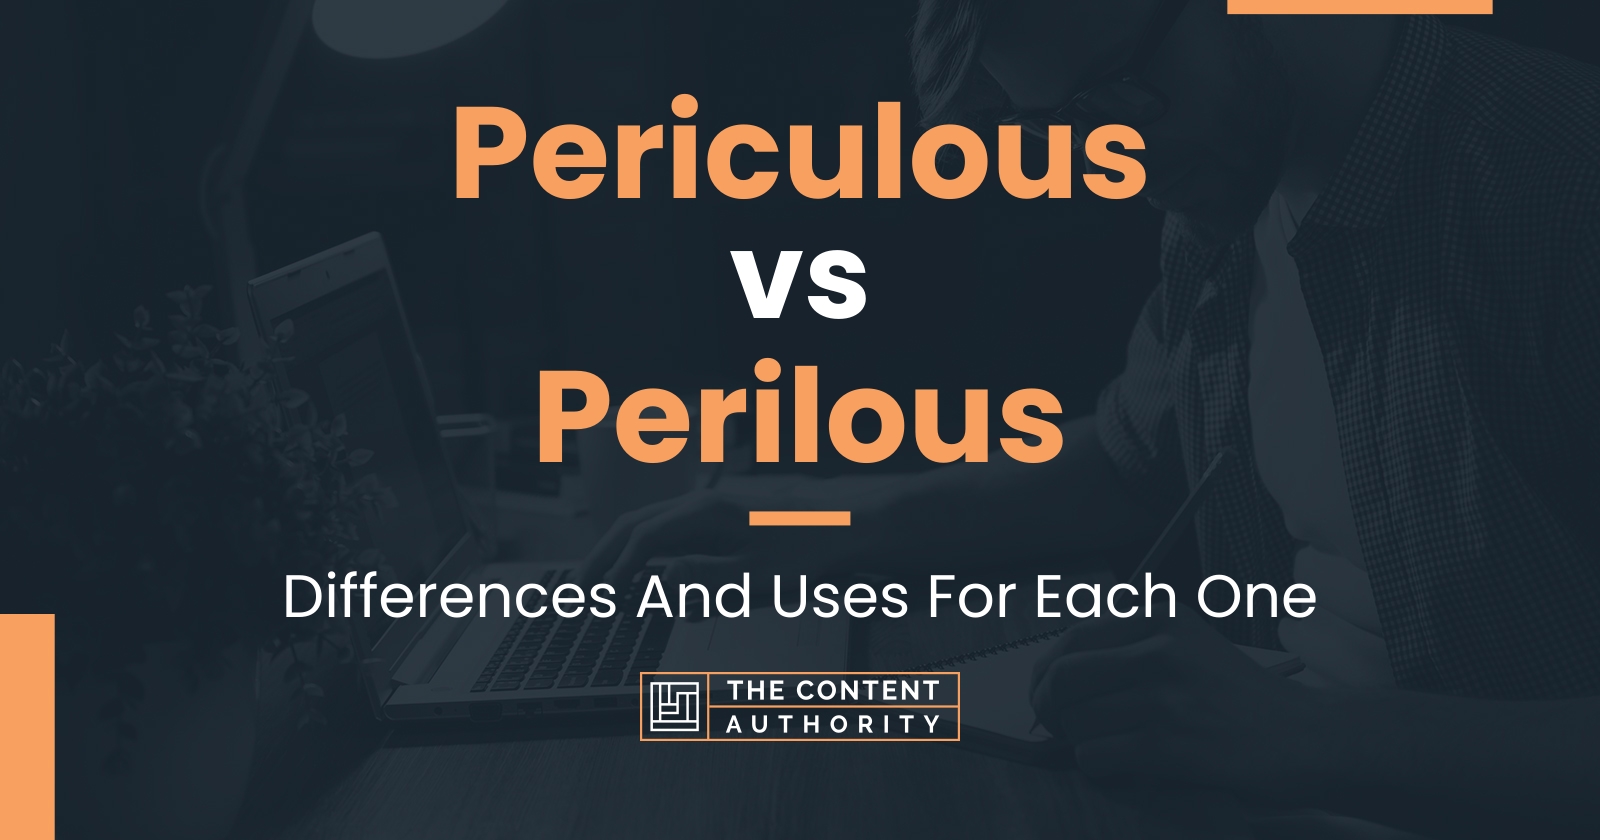 Periculous vs Perilous: Differences And Uses For Each One